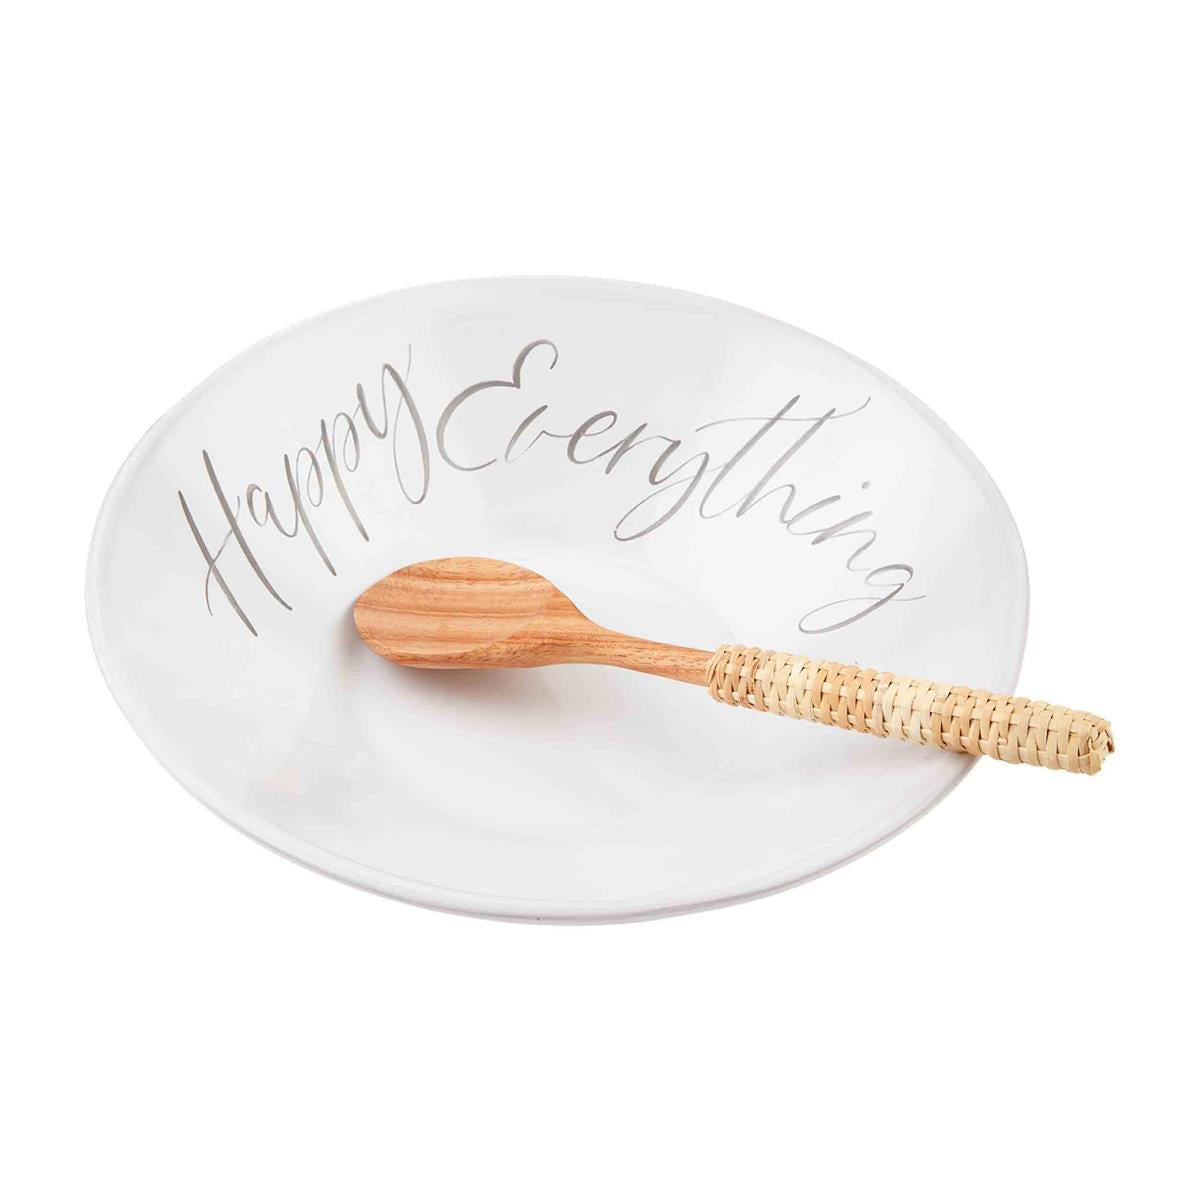 A white bowl that reads "Happy Everything" with a wooden spoon with a rattan-wrapped handle sitting inside the bowl.